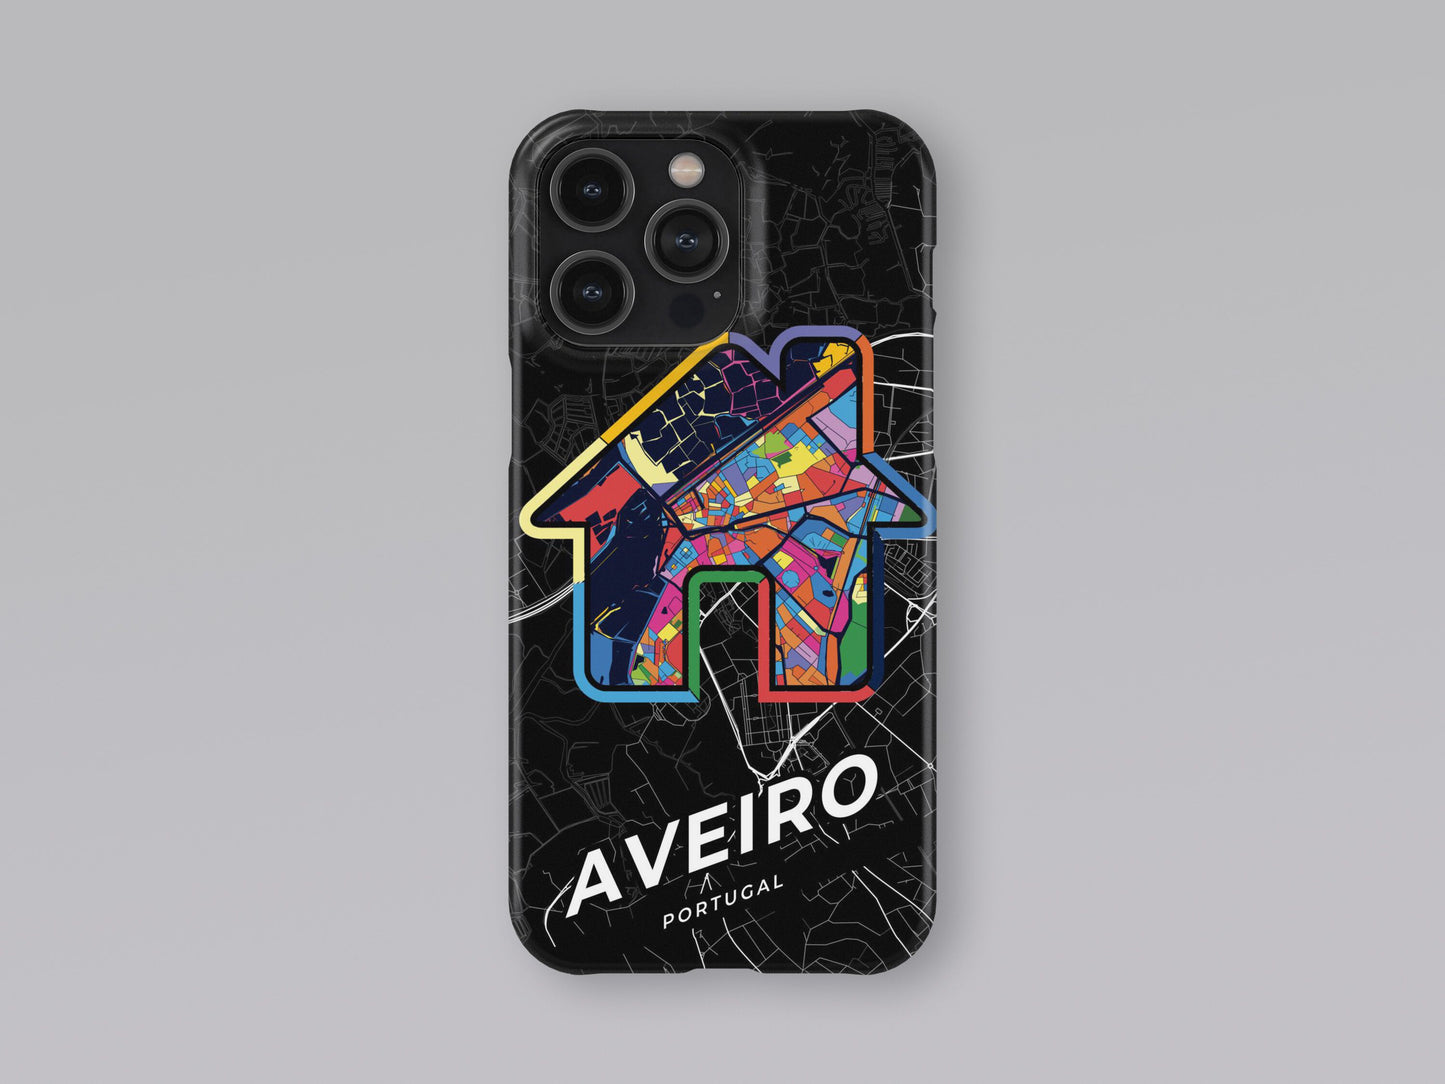 Aveiro Portugal slim phone case with colorful icon. Birthday, wedding or housewarming gift. Couple match cases. 3